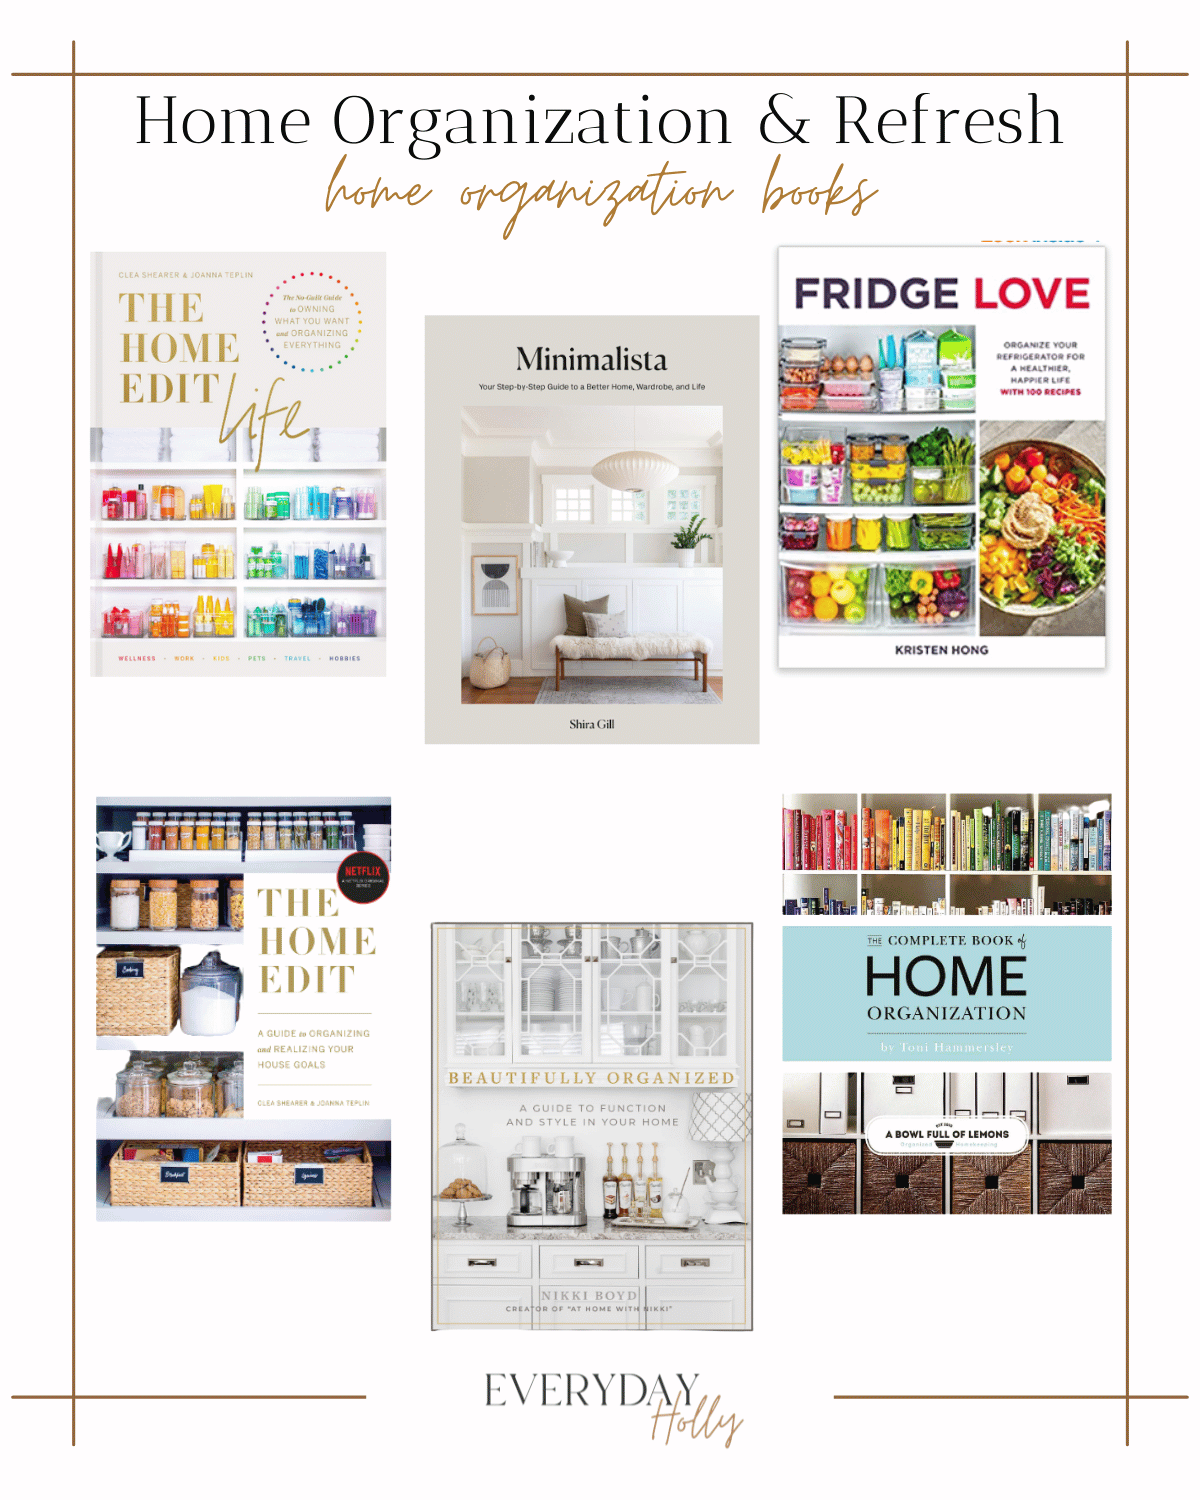 home organization books, the home edit life book, minimalista book, fridge love book, the home edit, beautifully organized book, the complete book of home organization 